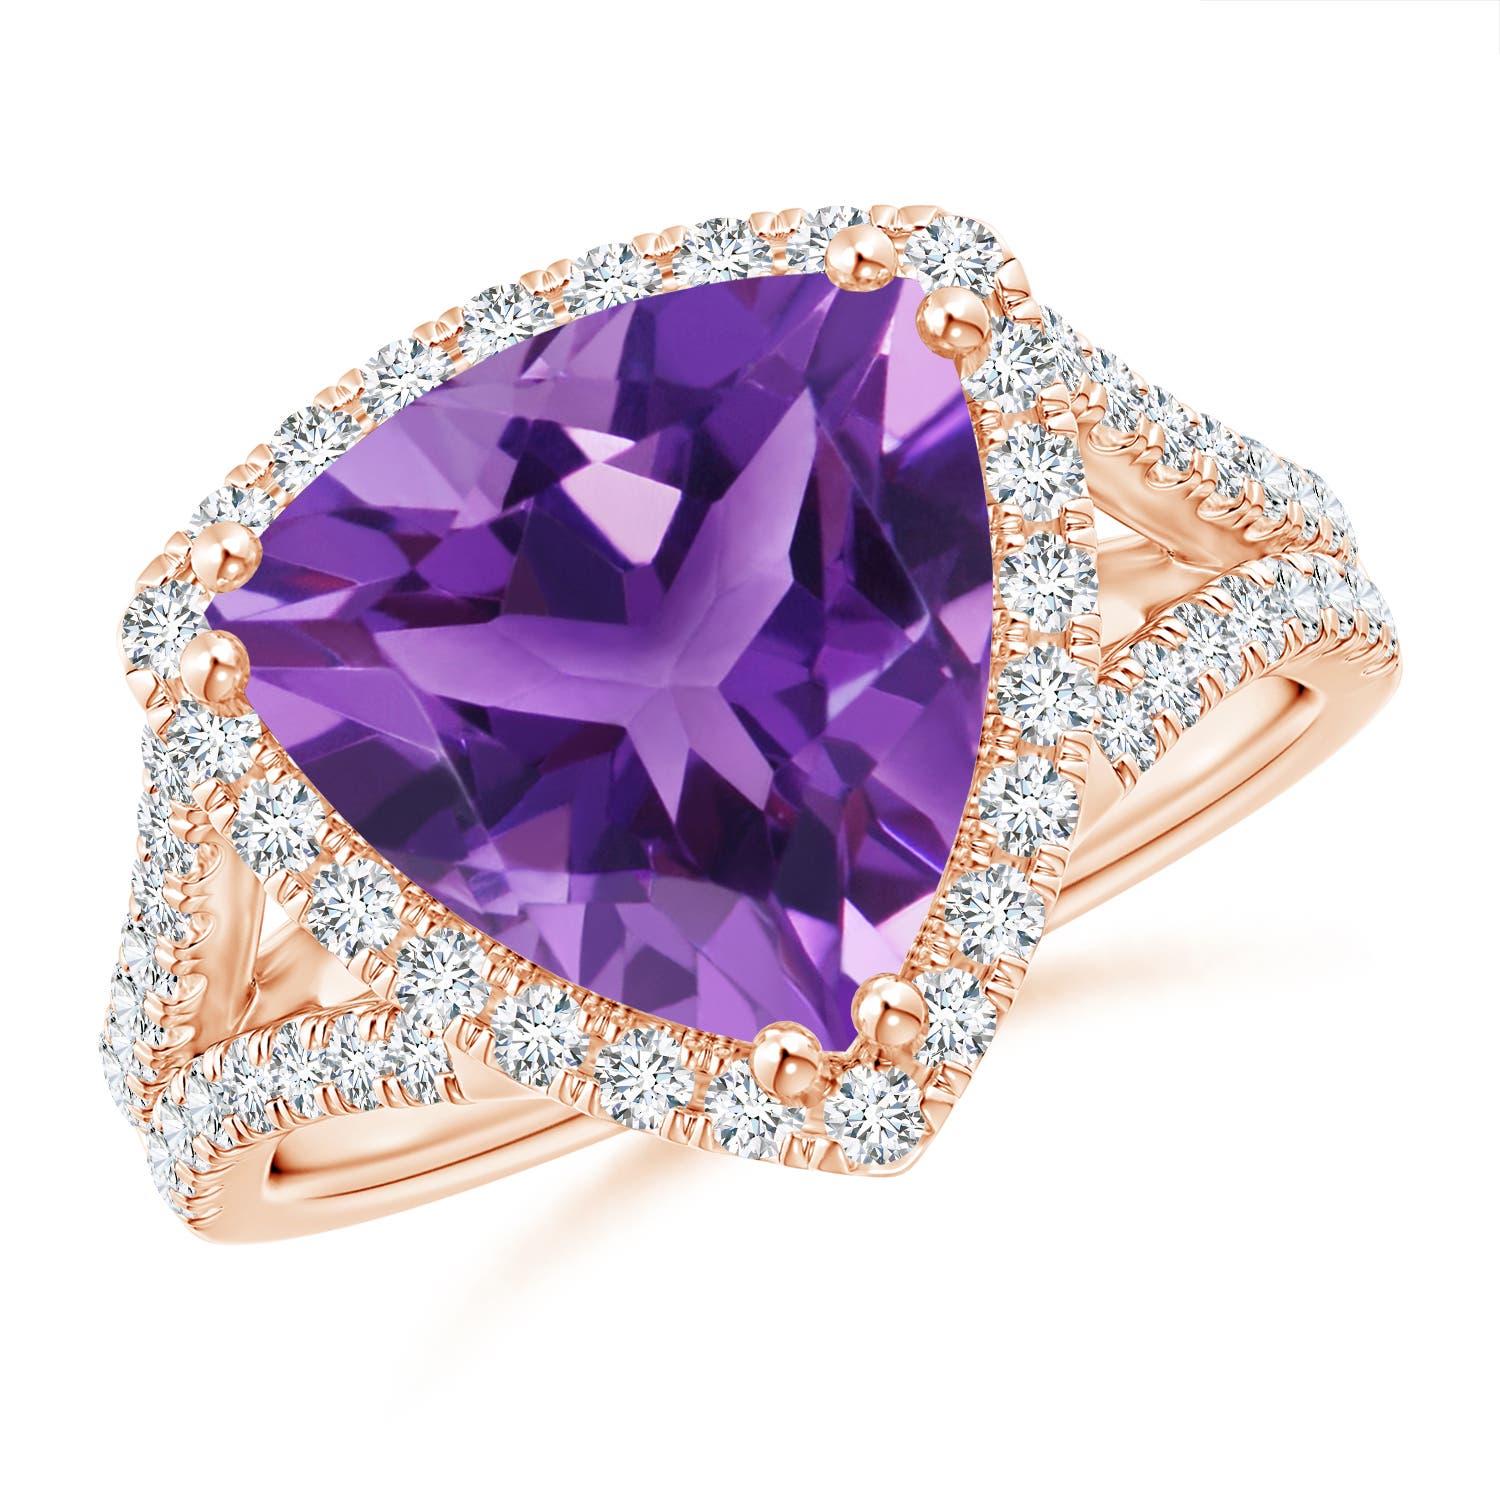 AAA - Amethyst / 4.47 CT / 14 KT Rose Gold